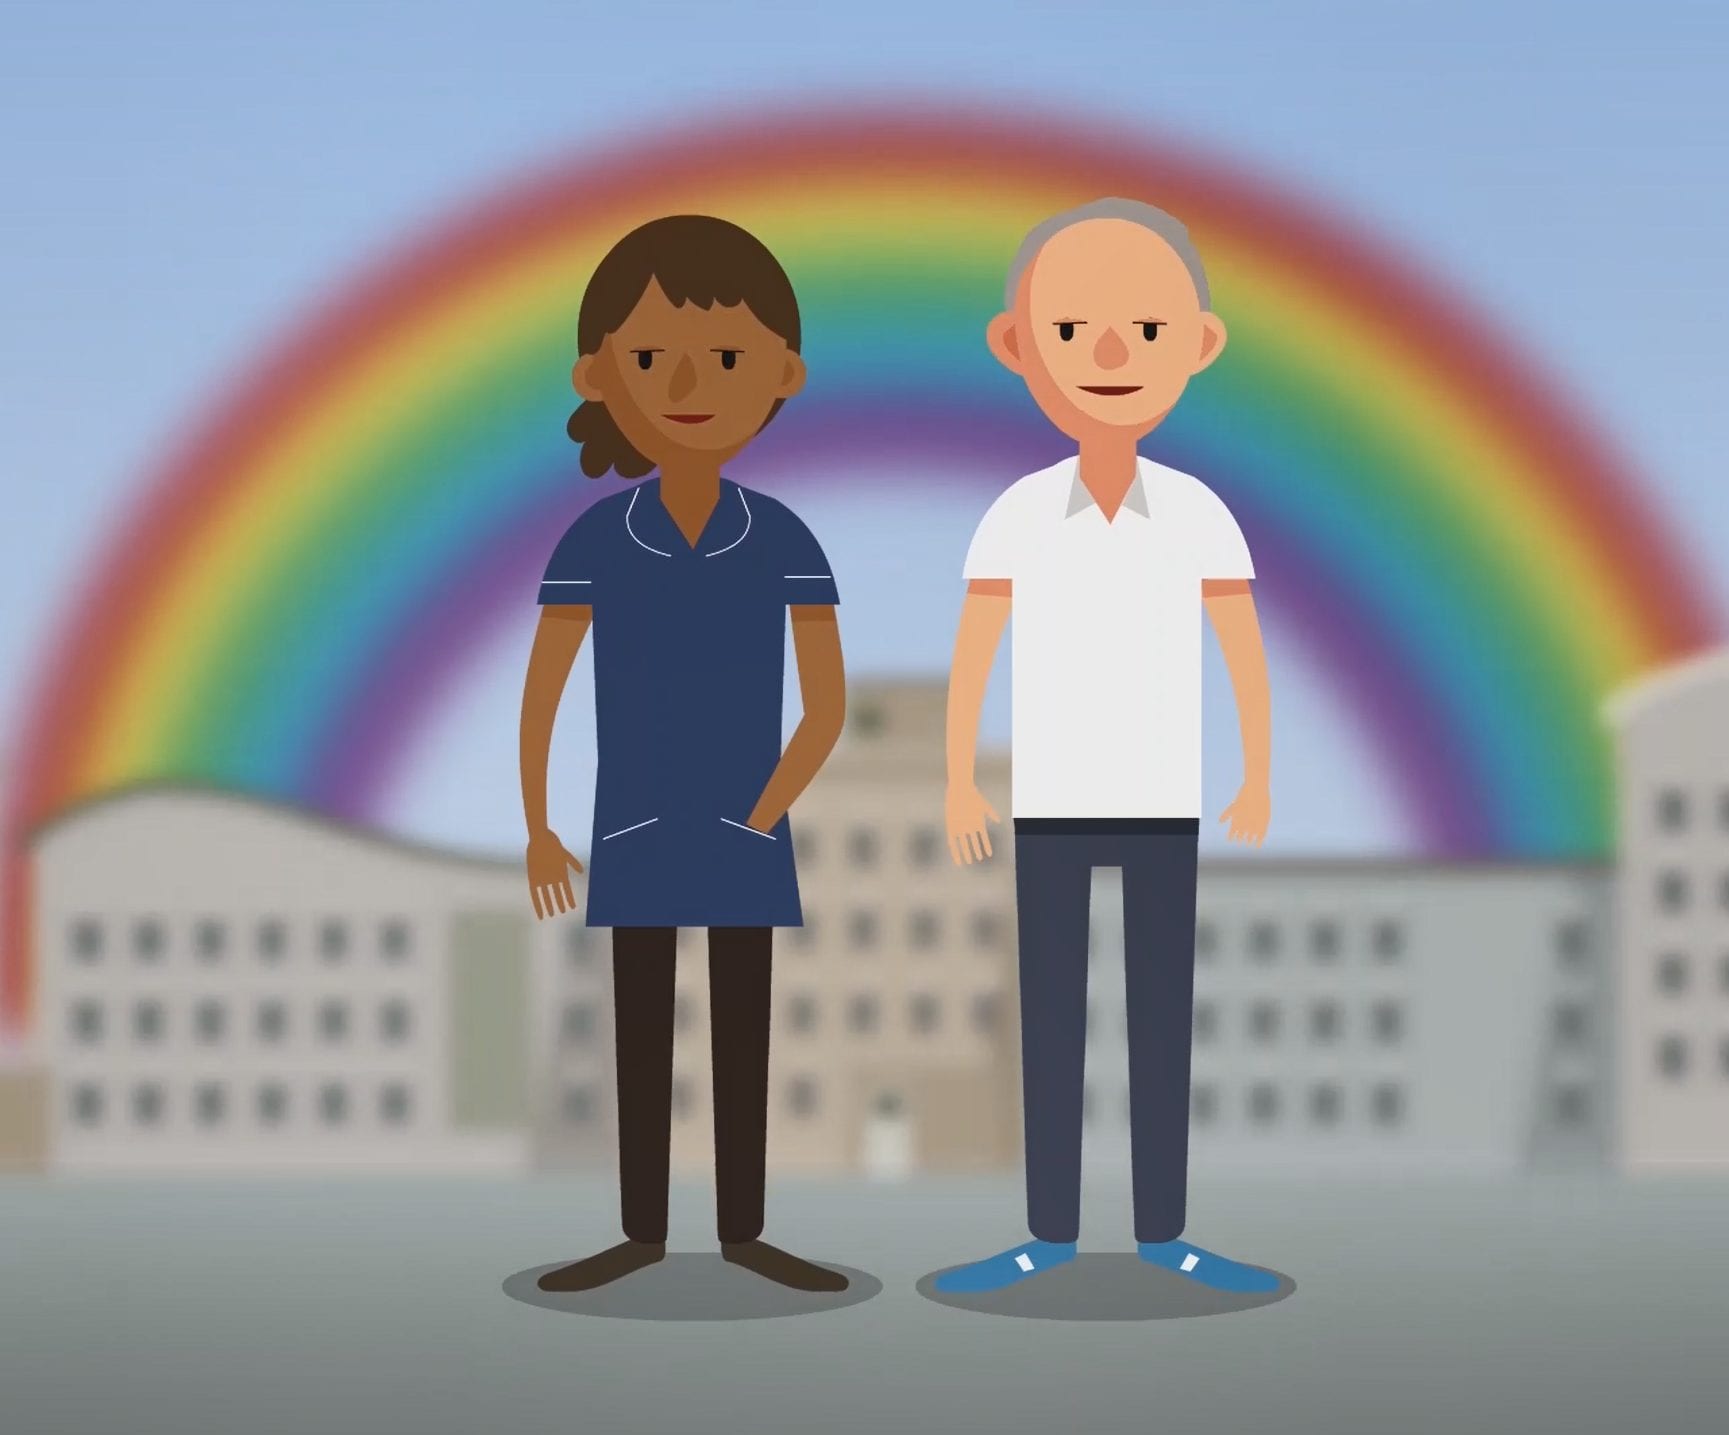 Two cartoon healthworkers with a rainbow